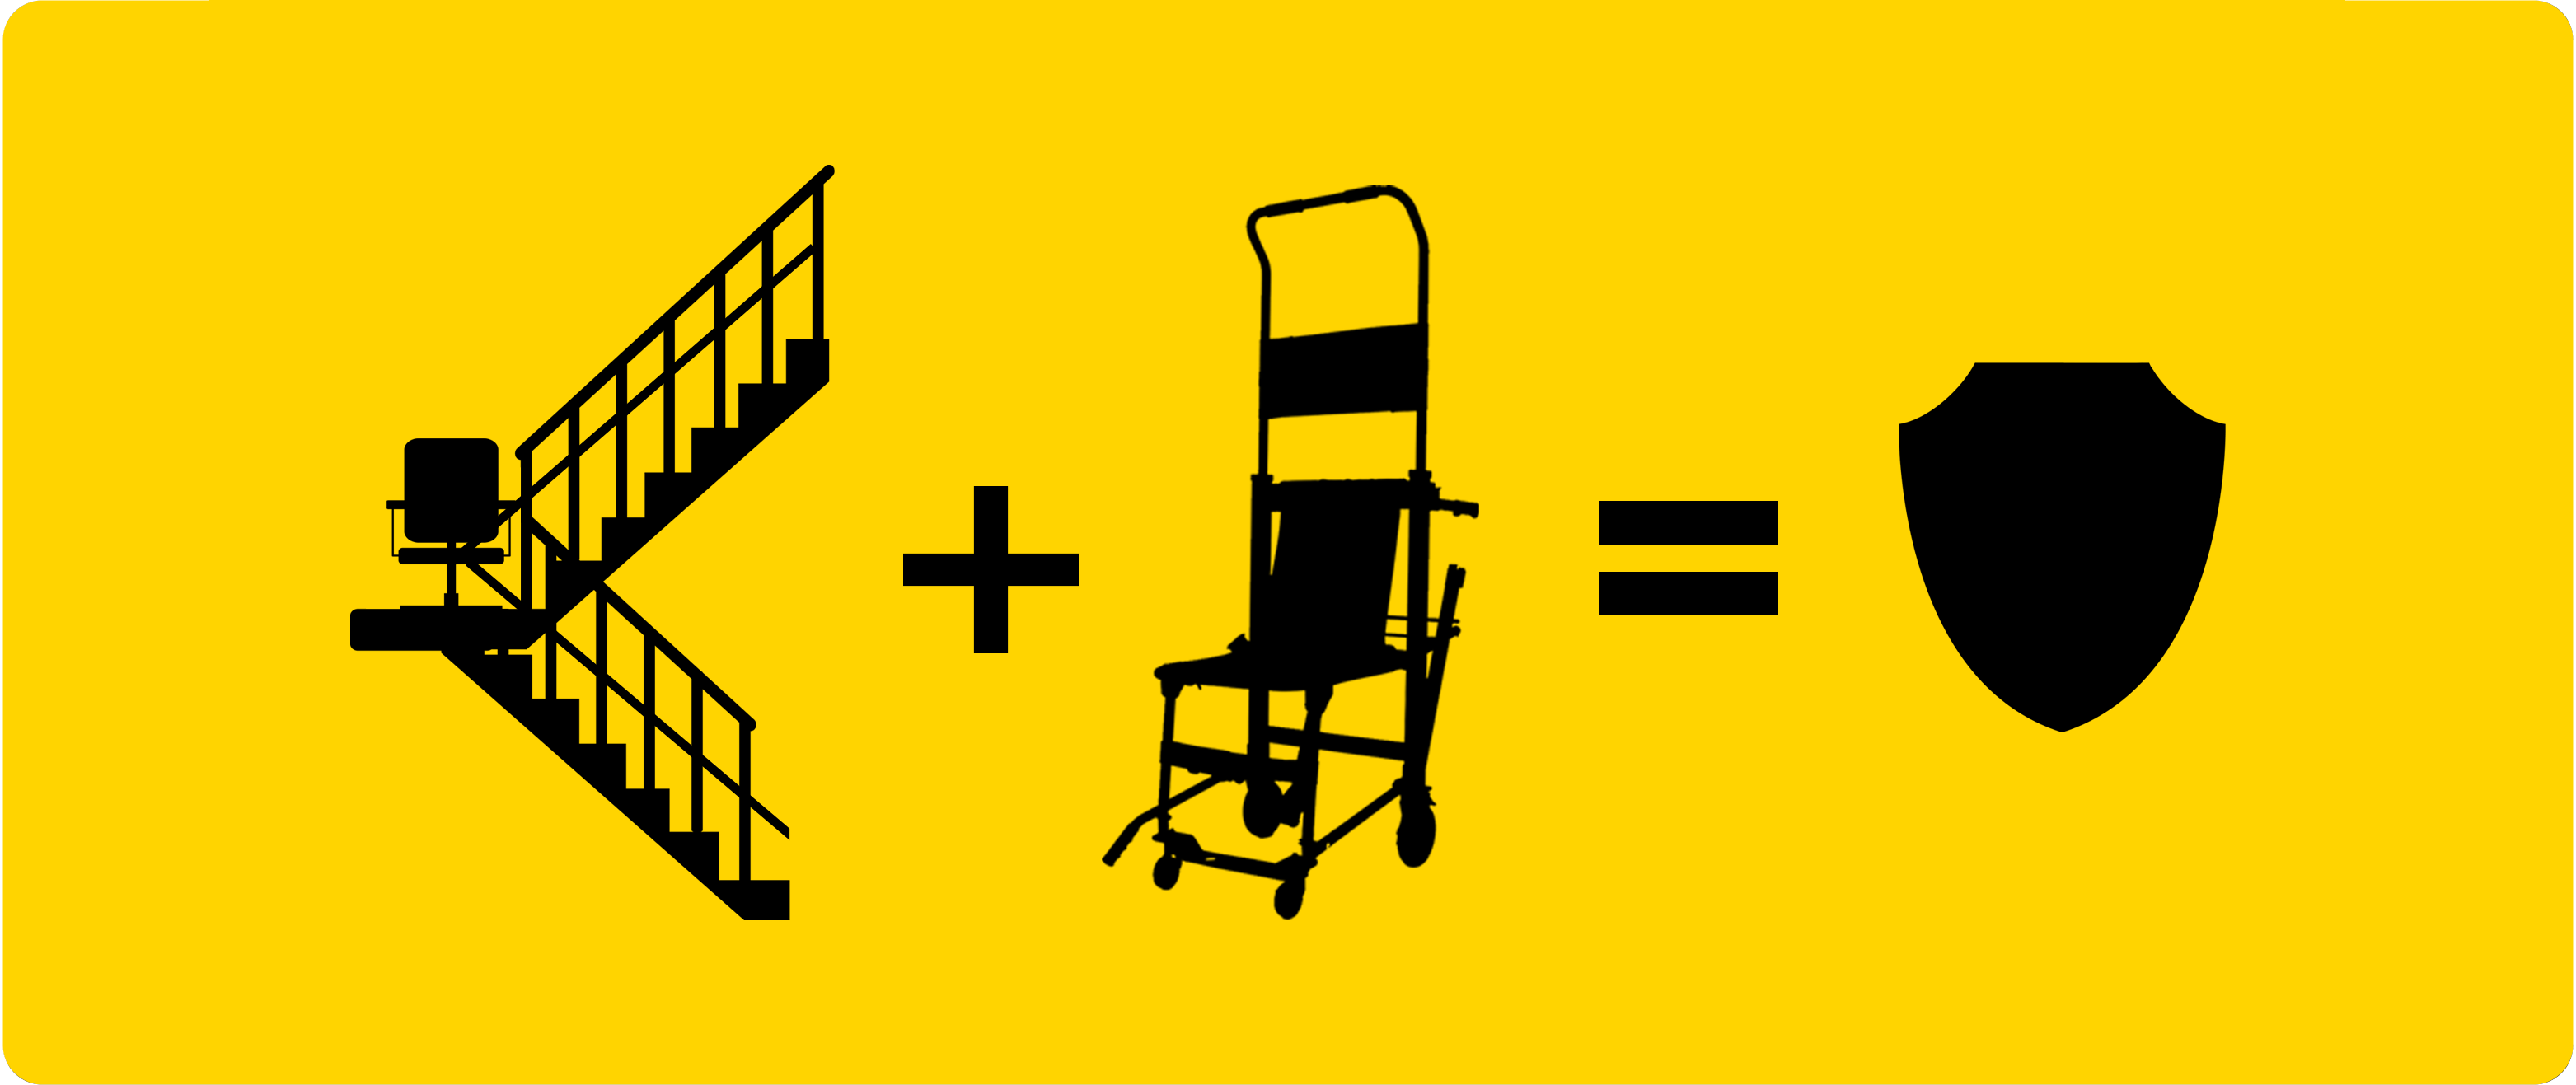 yellow background with black line drawing of emergency evacuation chair for stairs